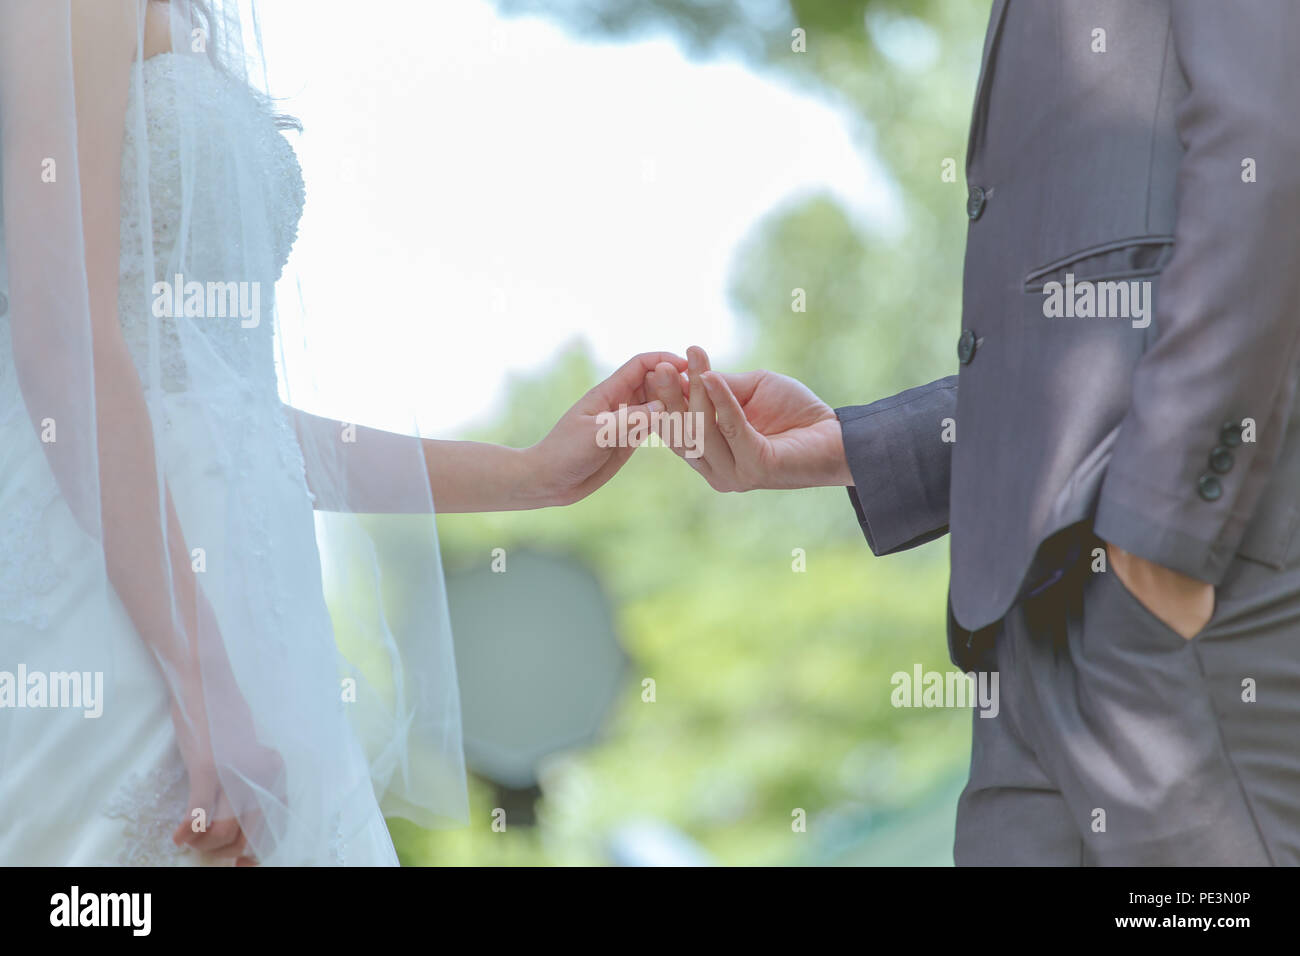 Married bride and groom holding hands as a symbol of love and happiness. Stock Photo